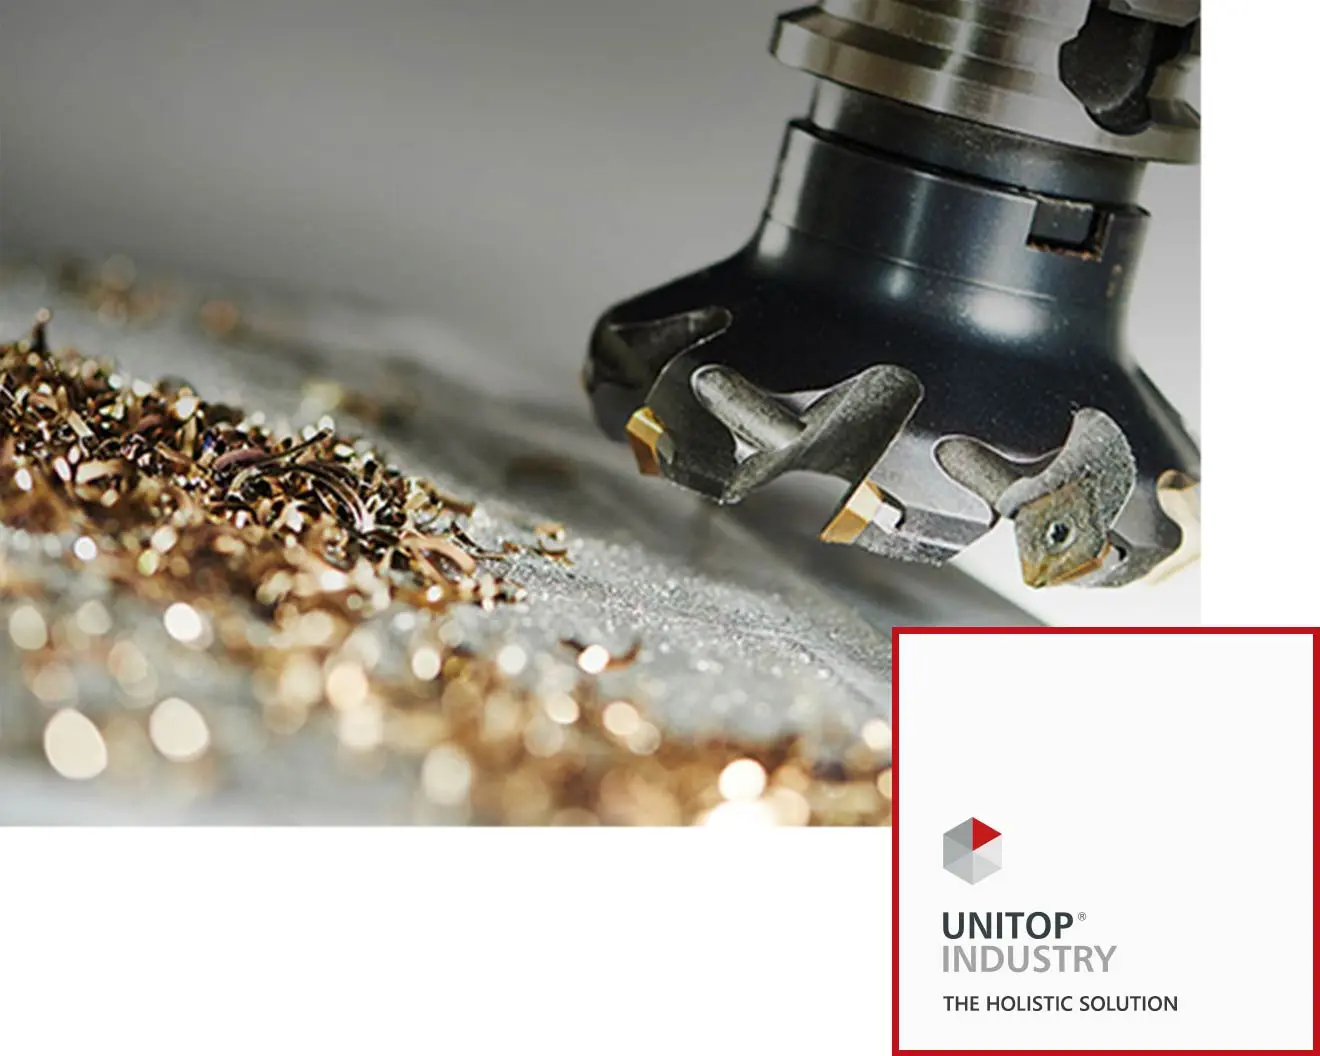 Milling machine with metal shavings and unitop industry logo at the bottom right